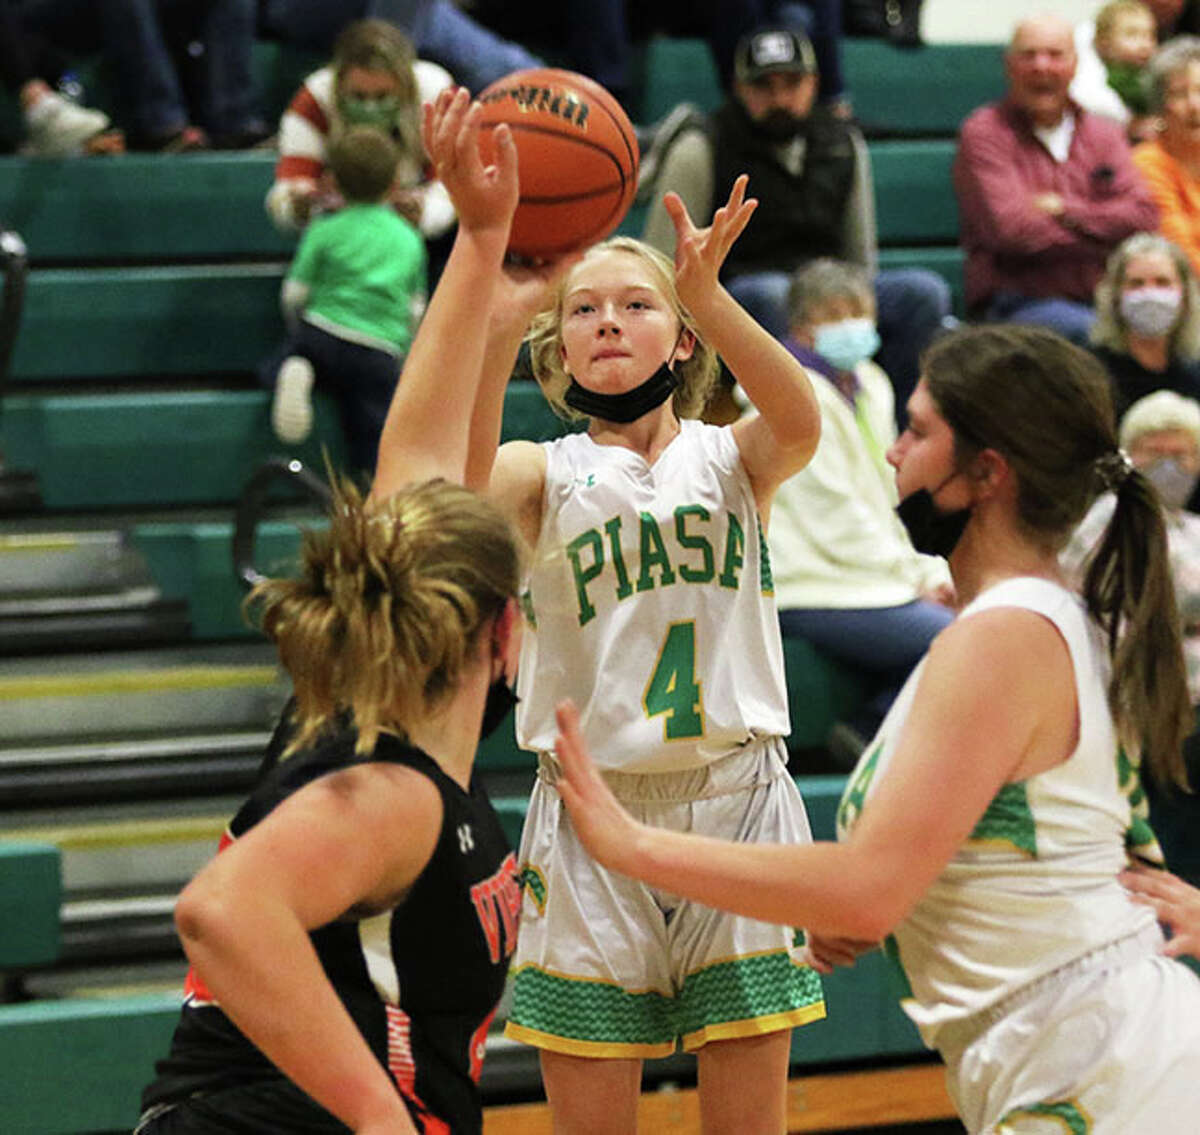 Southwestern freshman Gracie Darr (44) shoots over a South County defender Monday night in Piasa.